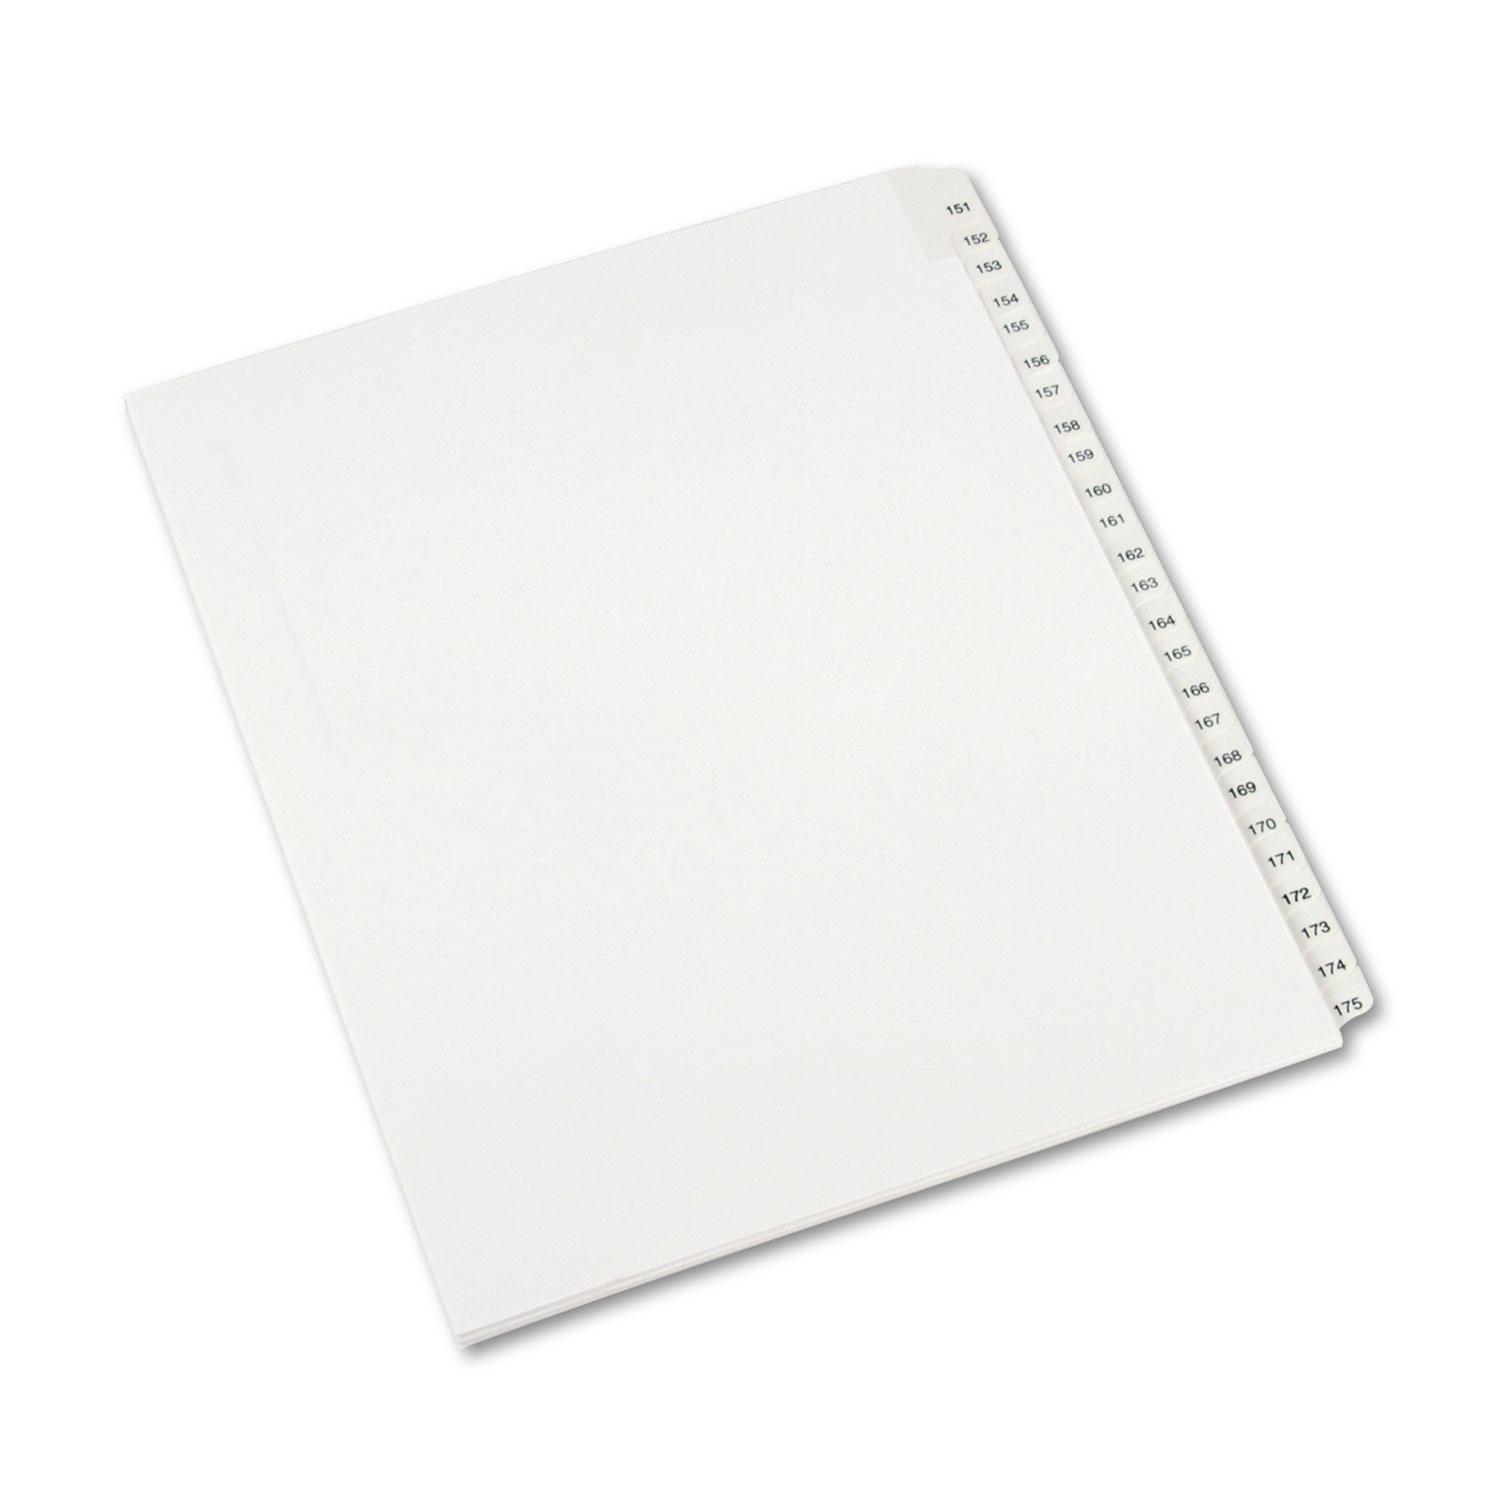 Avery AVE82189 Allstate-Style Legal Exhibit Side Tab Dividers, 25-Tab,151-175, Letter, White